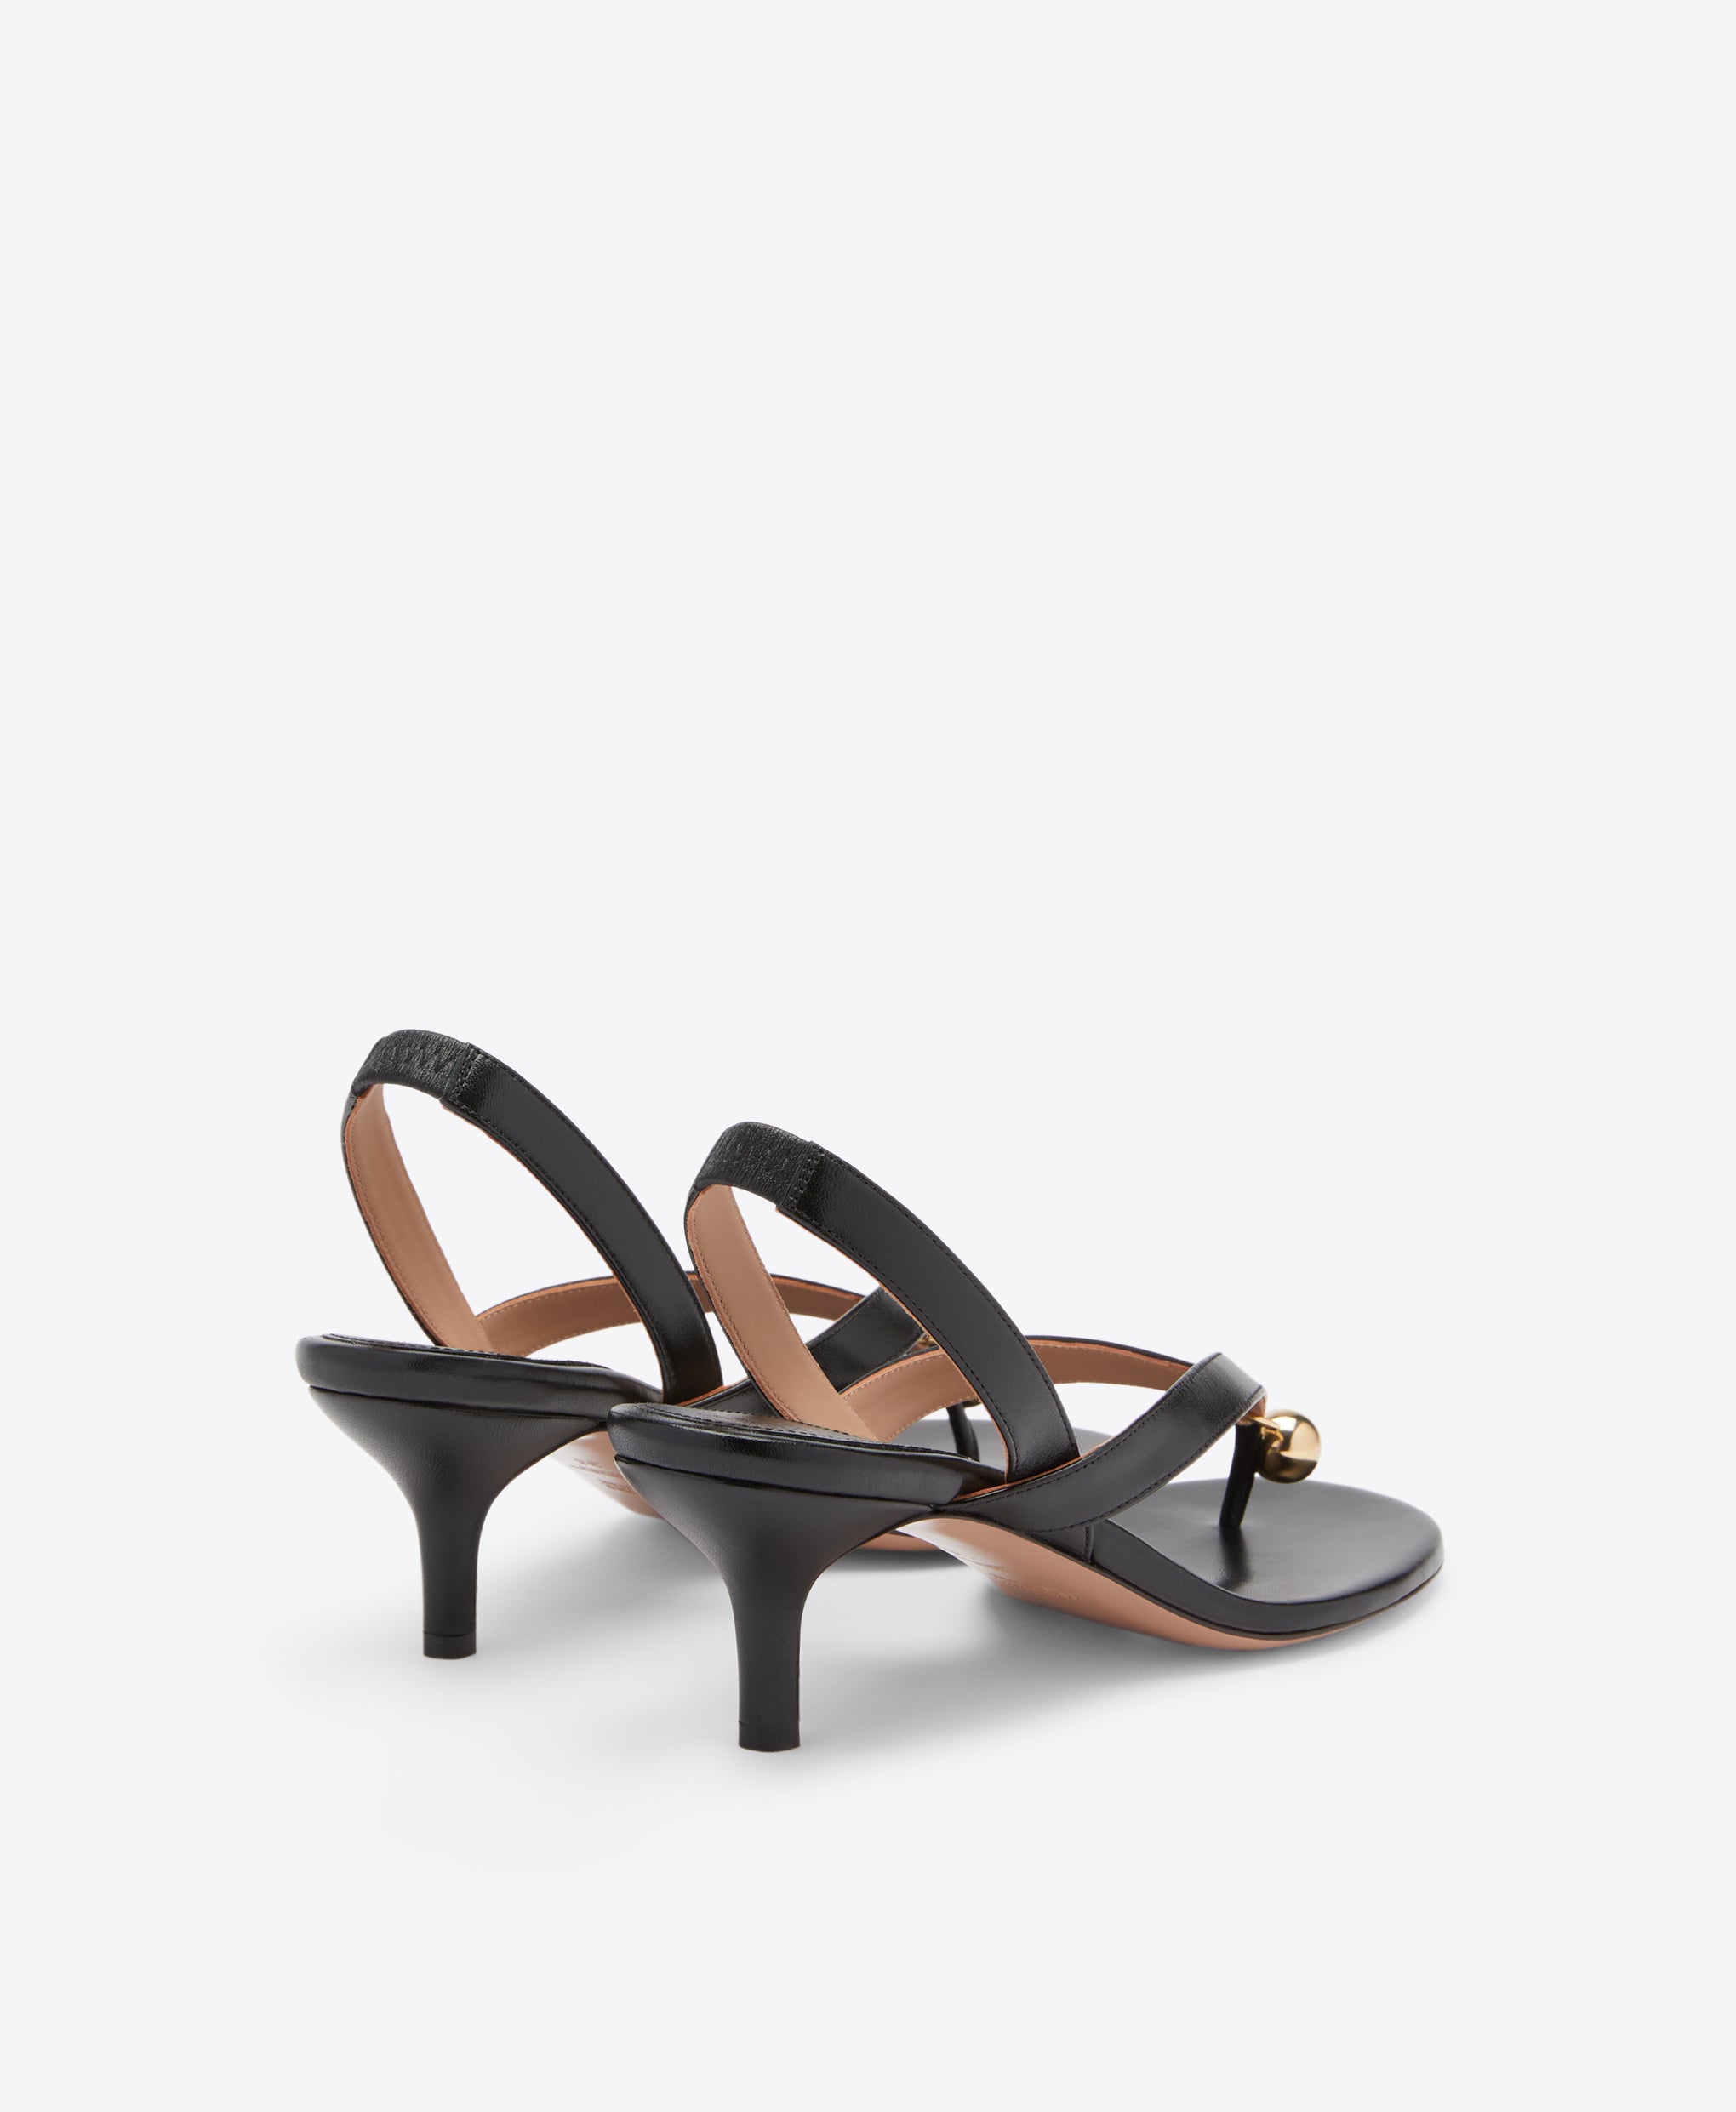 Lucie 45 Black Leather Heeled Sandal Malone Souliers